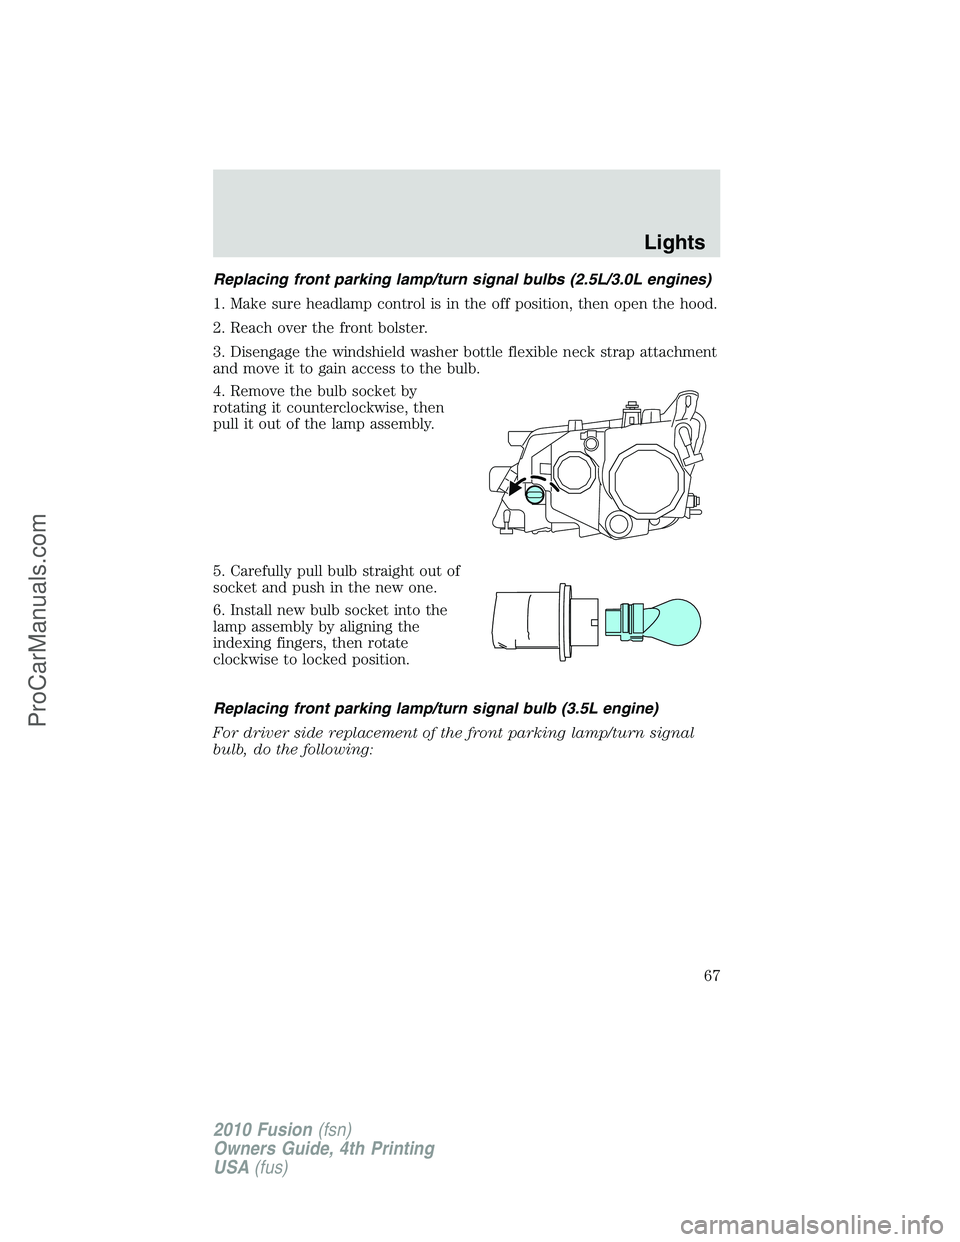 FORD FUSION 2010 Repair Manual Replacing front parking lamp/turn signal bulbs (2.5L/3.0L engines)
1. Make sure headlamp control is in the off position, then open the hood.
2. Reach over the front bolster.
3. Disengage the windshiel